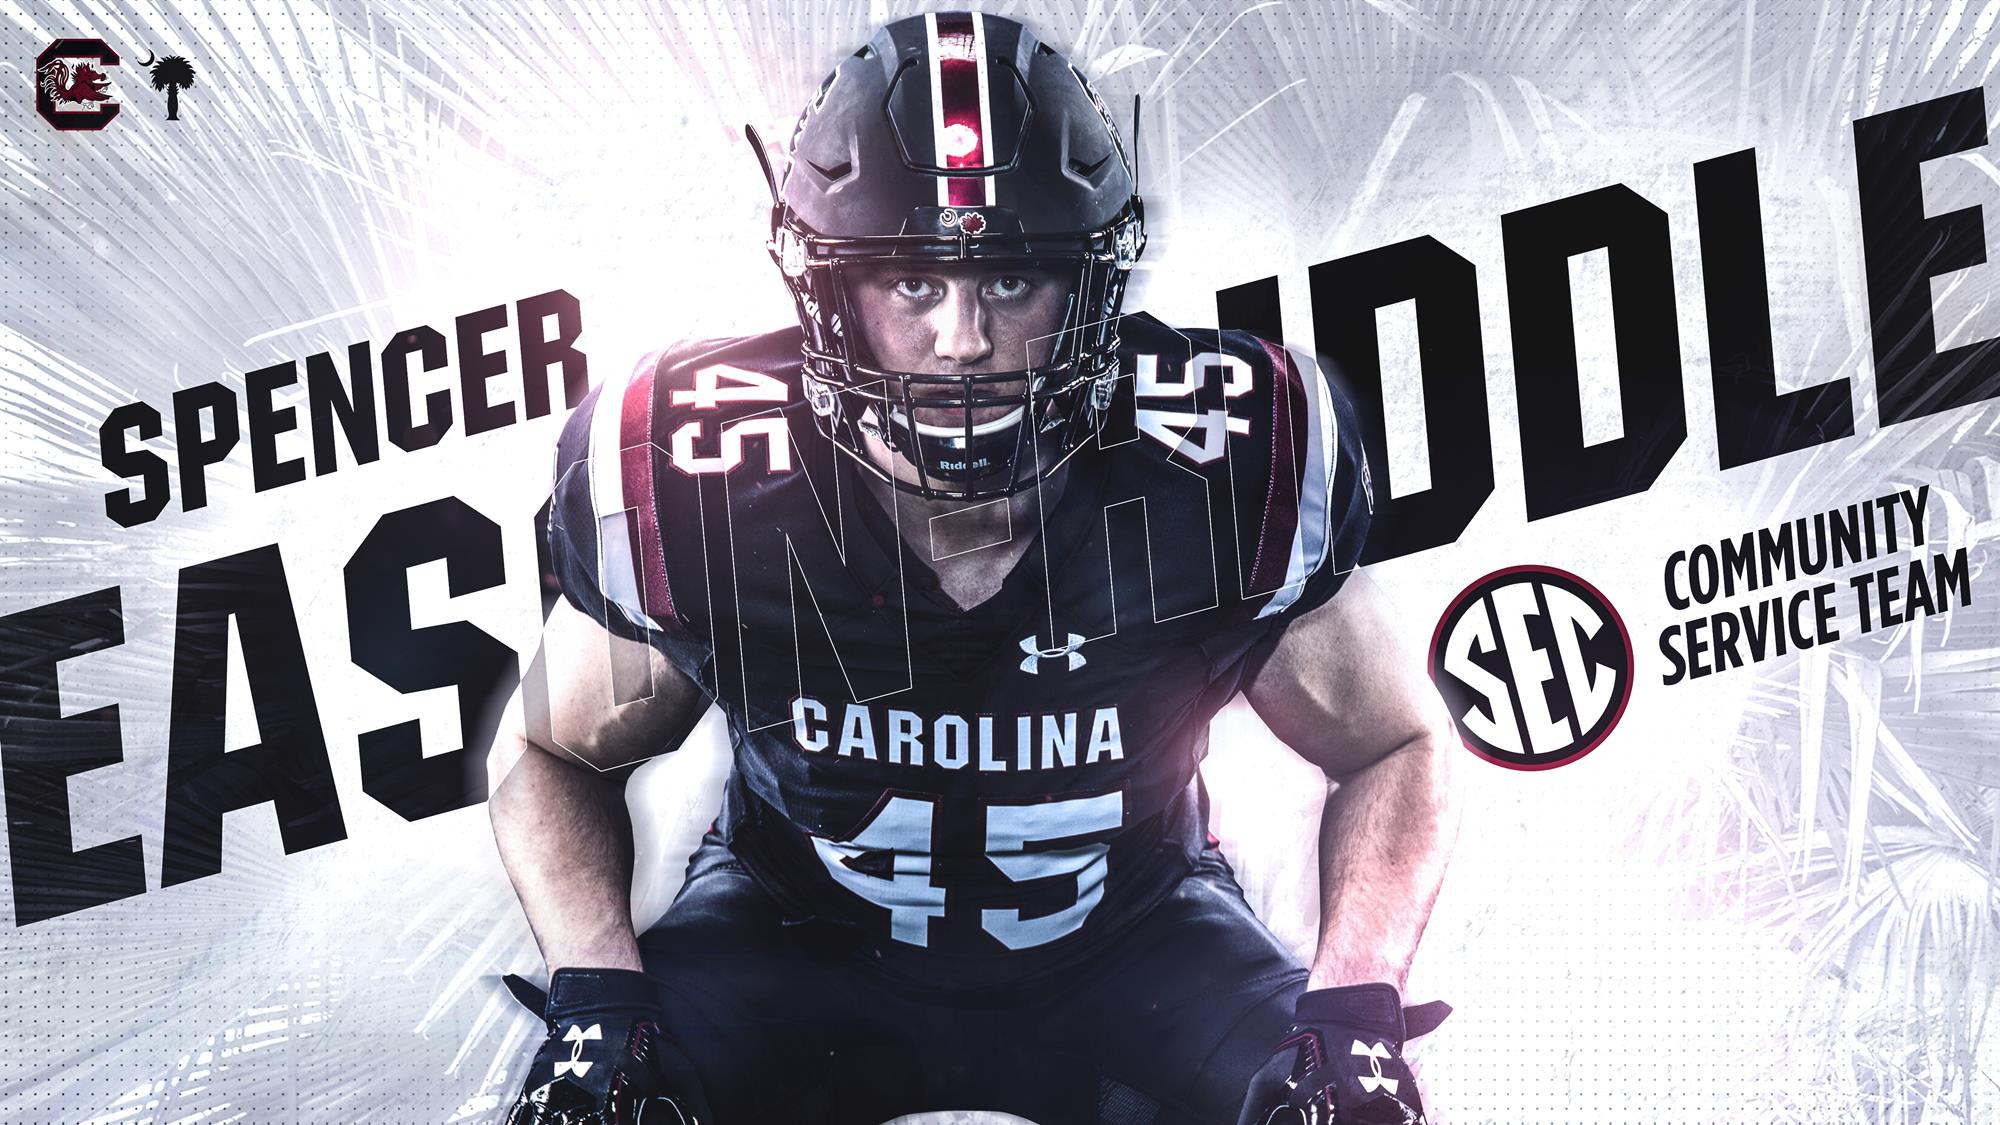 Eason-Riddle Named to SEC Community Service Team